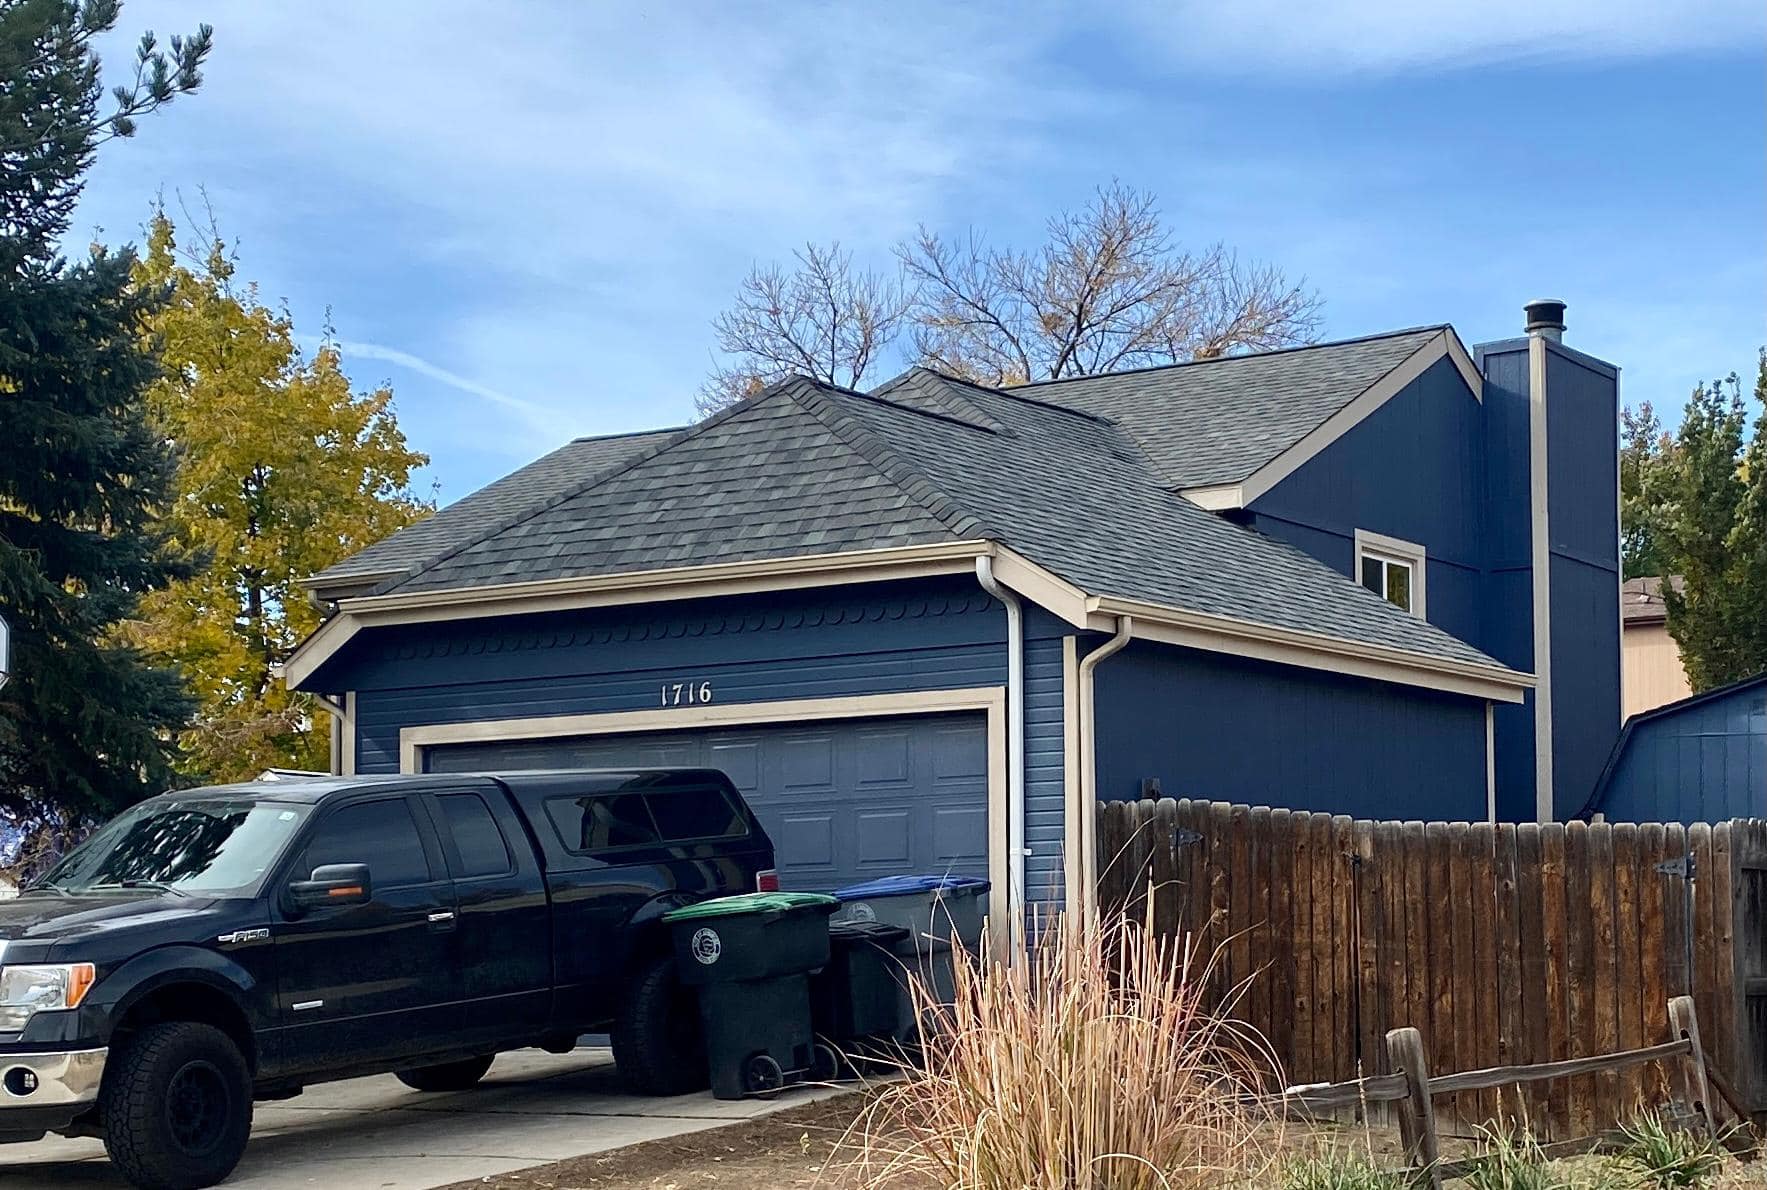 Colorado Roof Toppers - Mead (CO 80542), US, tile roof installation